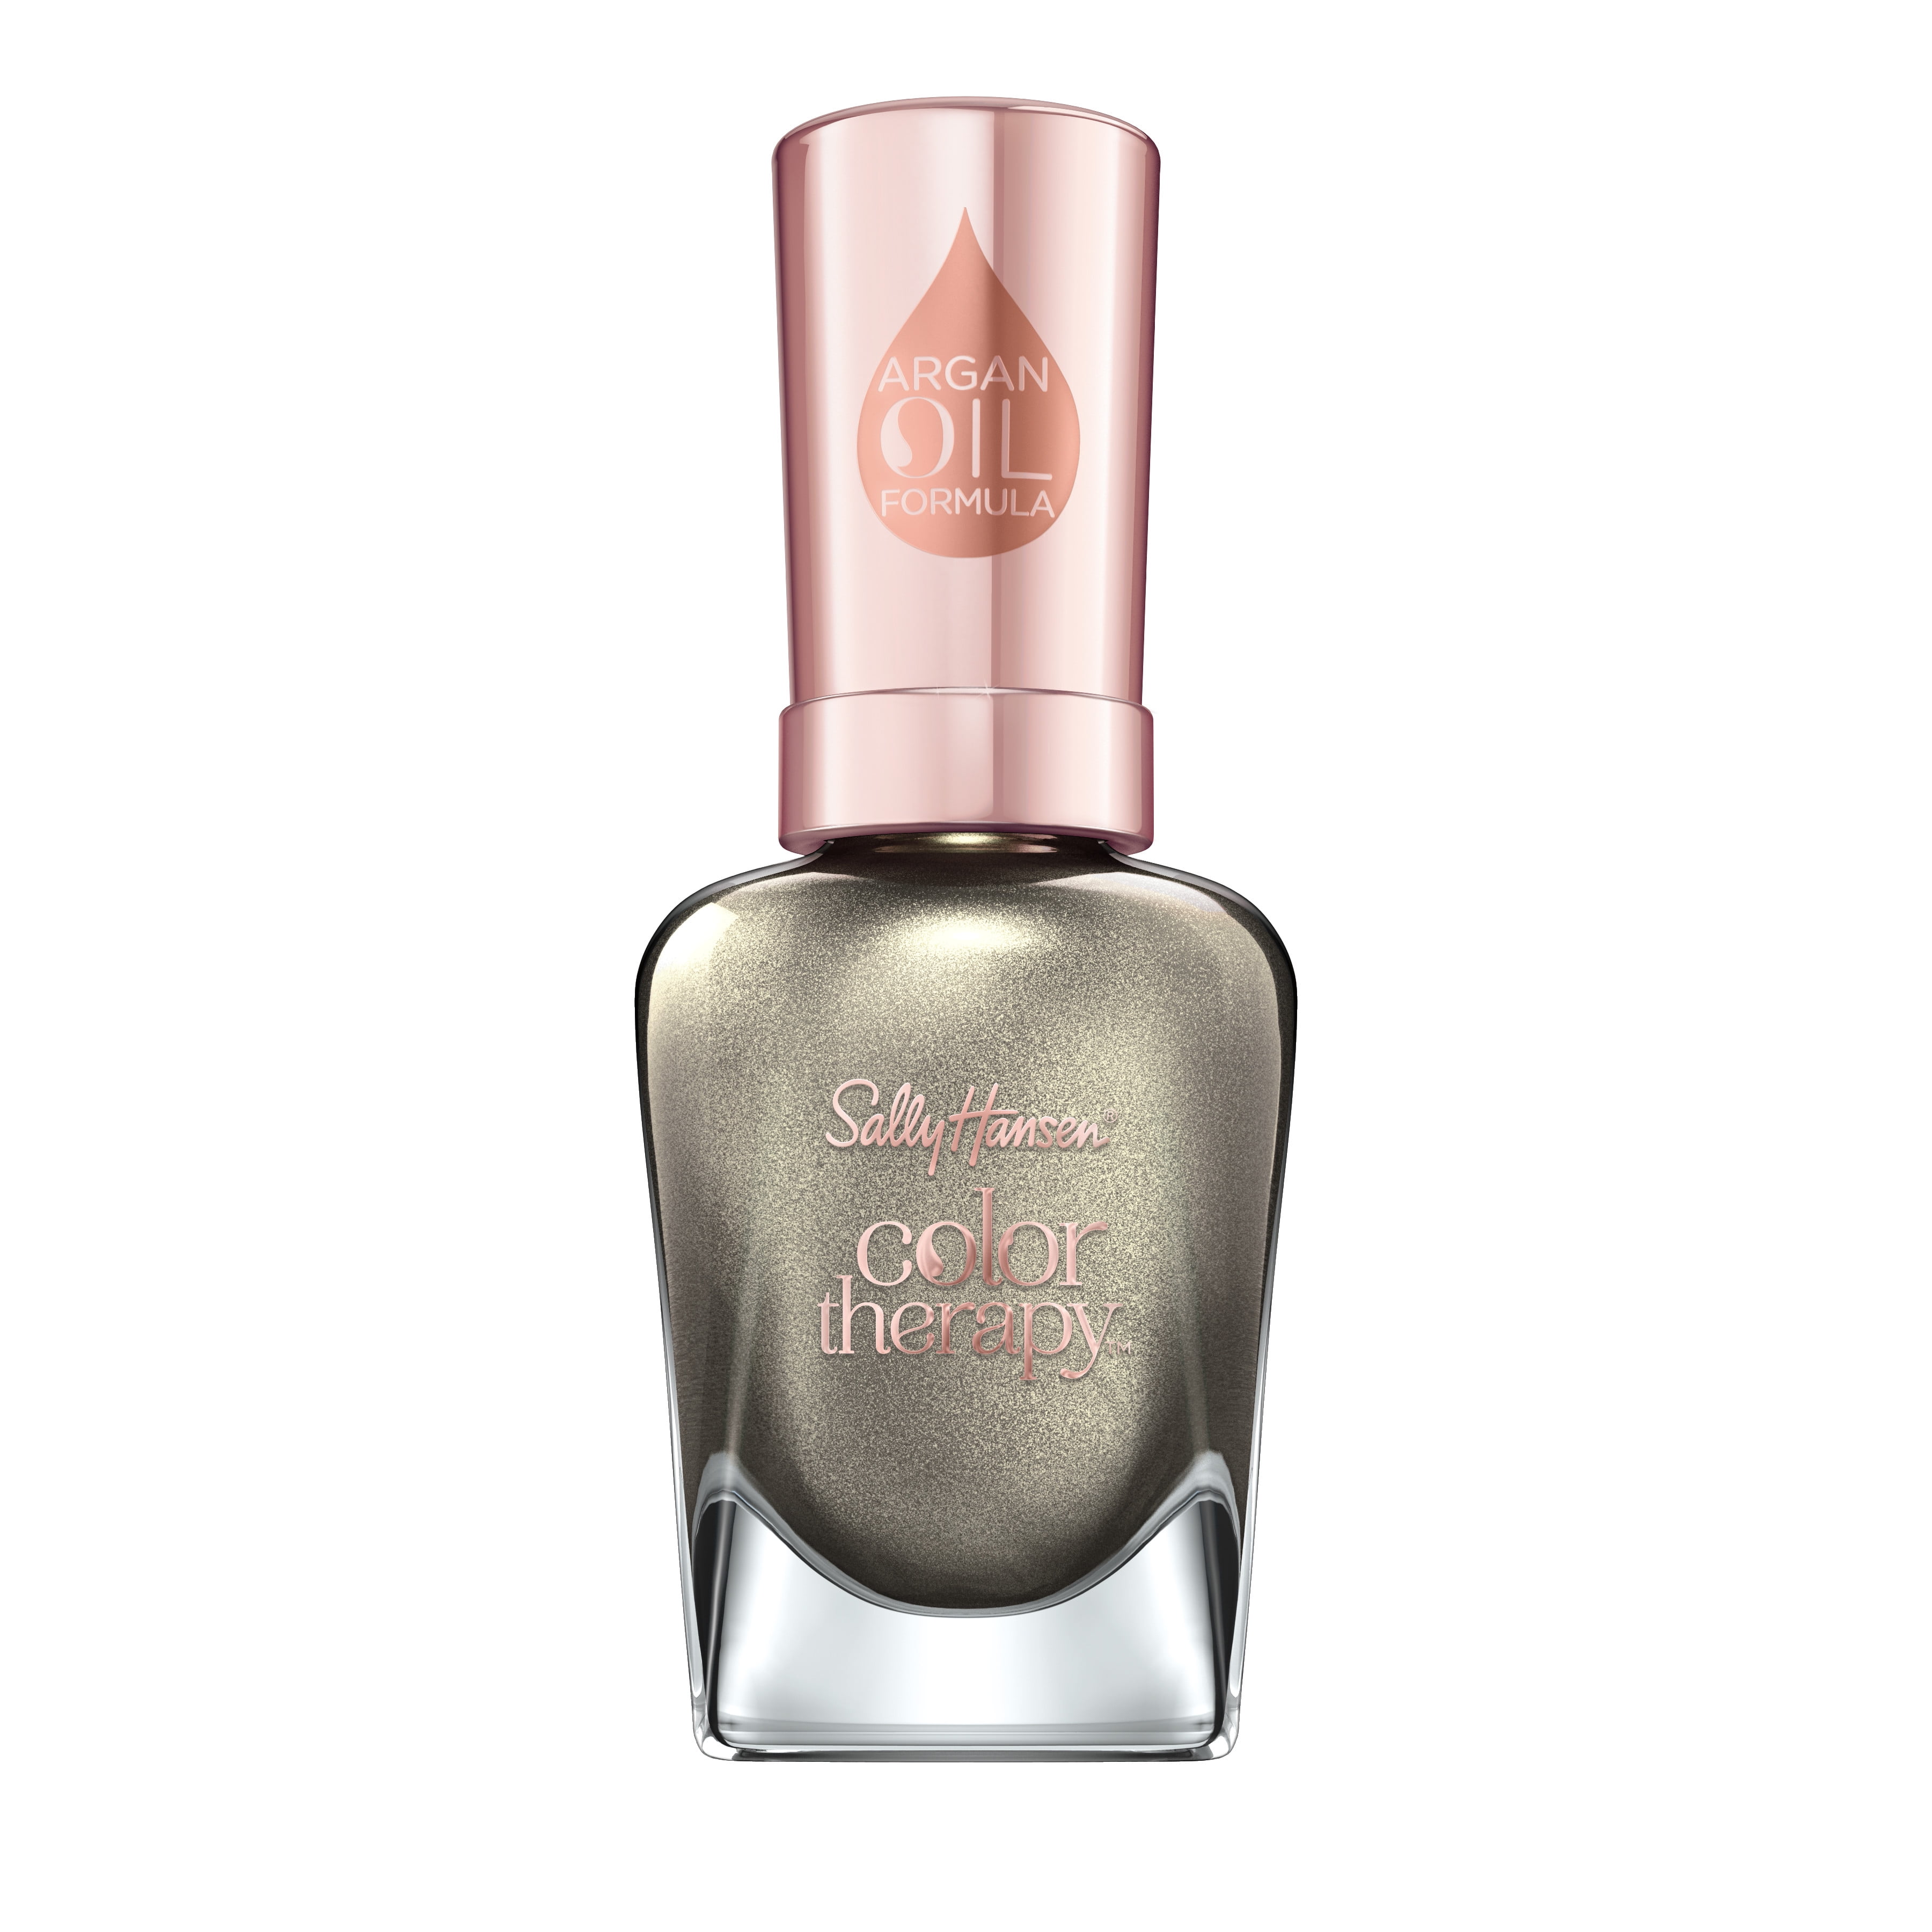 Sally Hansen Color Therapy Nail Color, Therapewter,  oz, Color Nail  Polish, Nail Polish, Nail Polish Colors, Restorative, Argan Oil Formula,  Instantly Moisturizes 